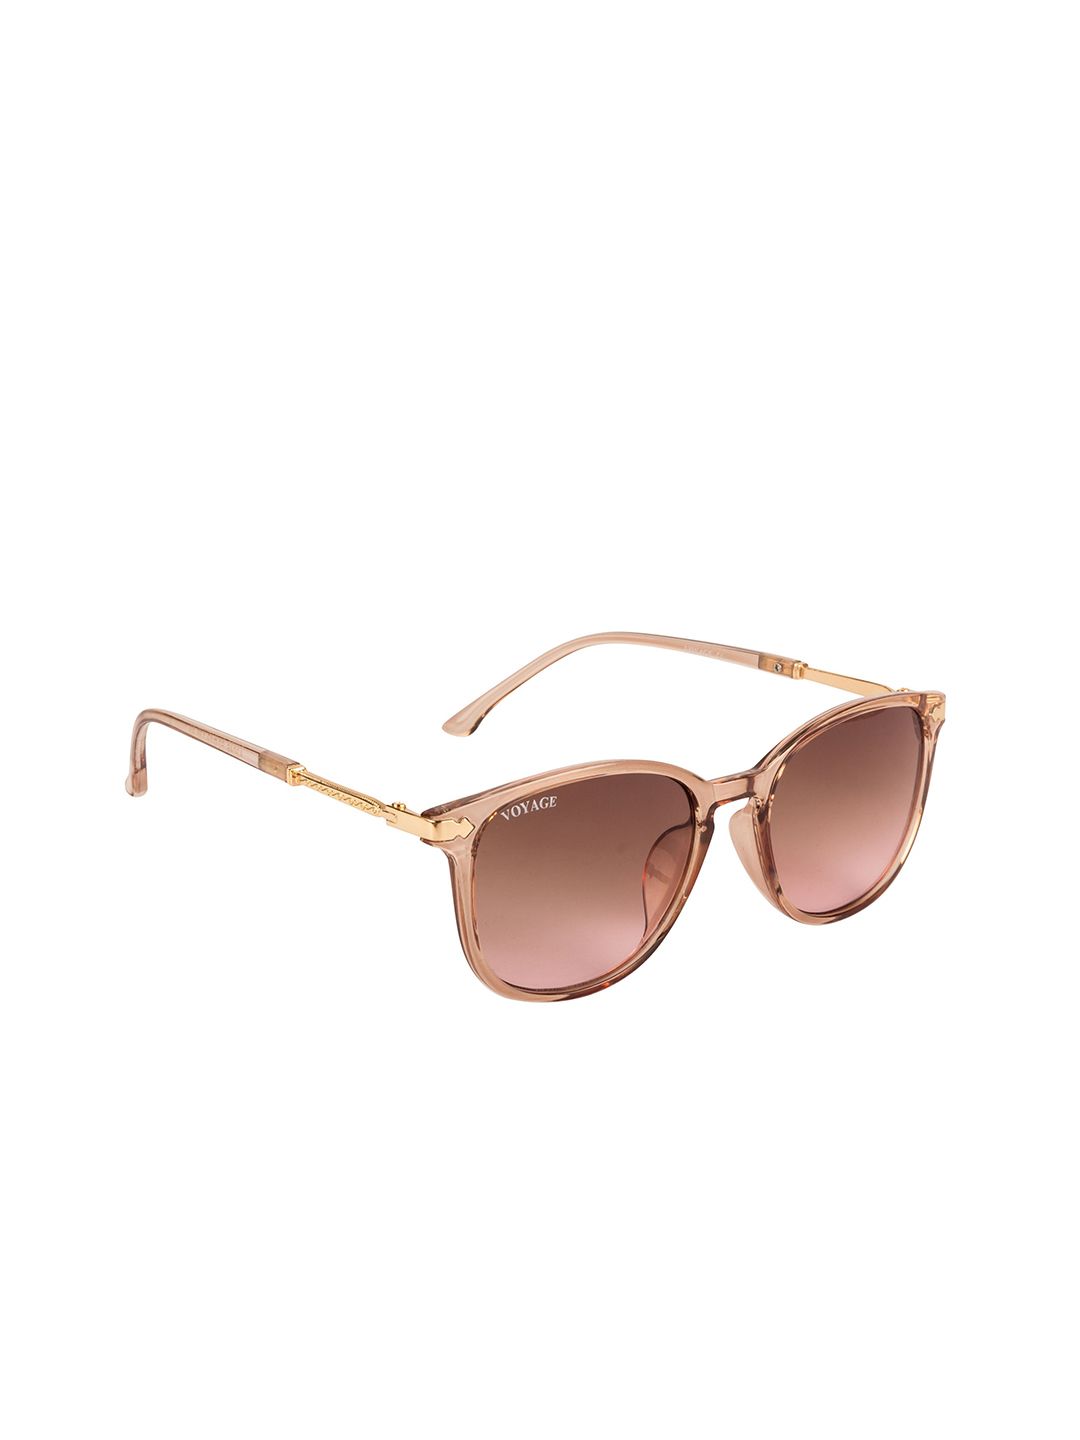 Voyage Women Brown Lens & Brown Wayfarer Sunglasses with UV Protected Lens A3046MG3181Z Price in India